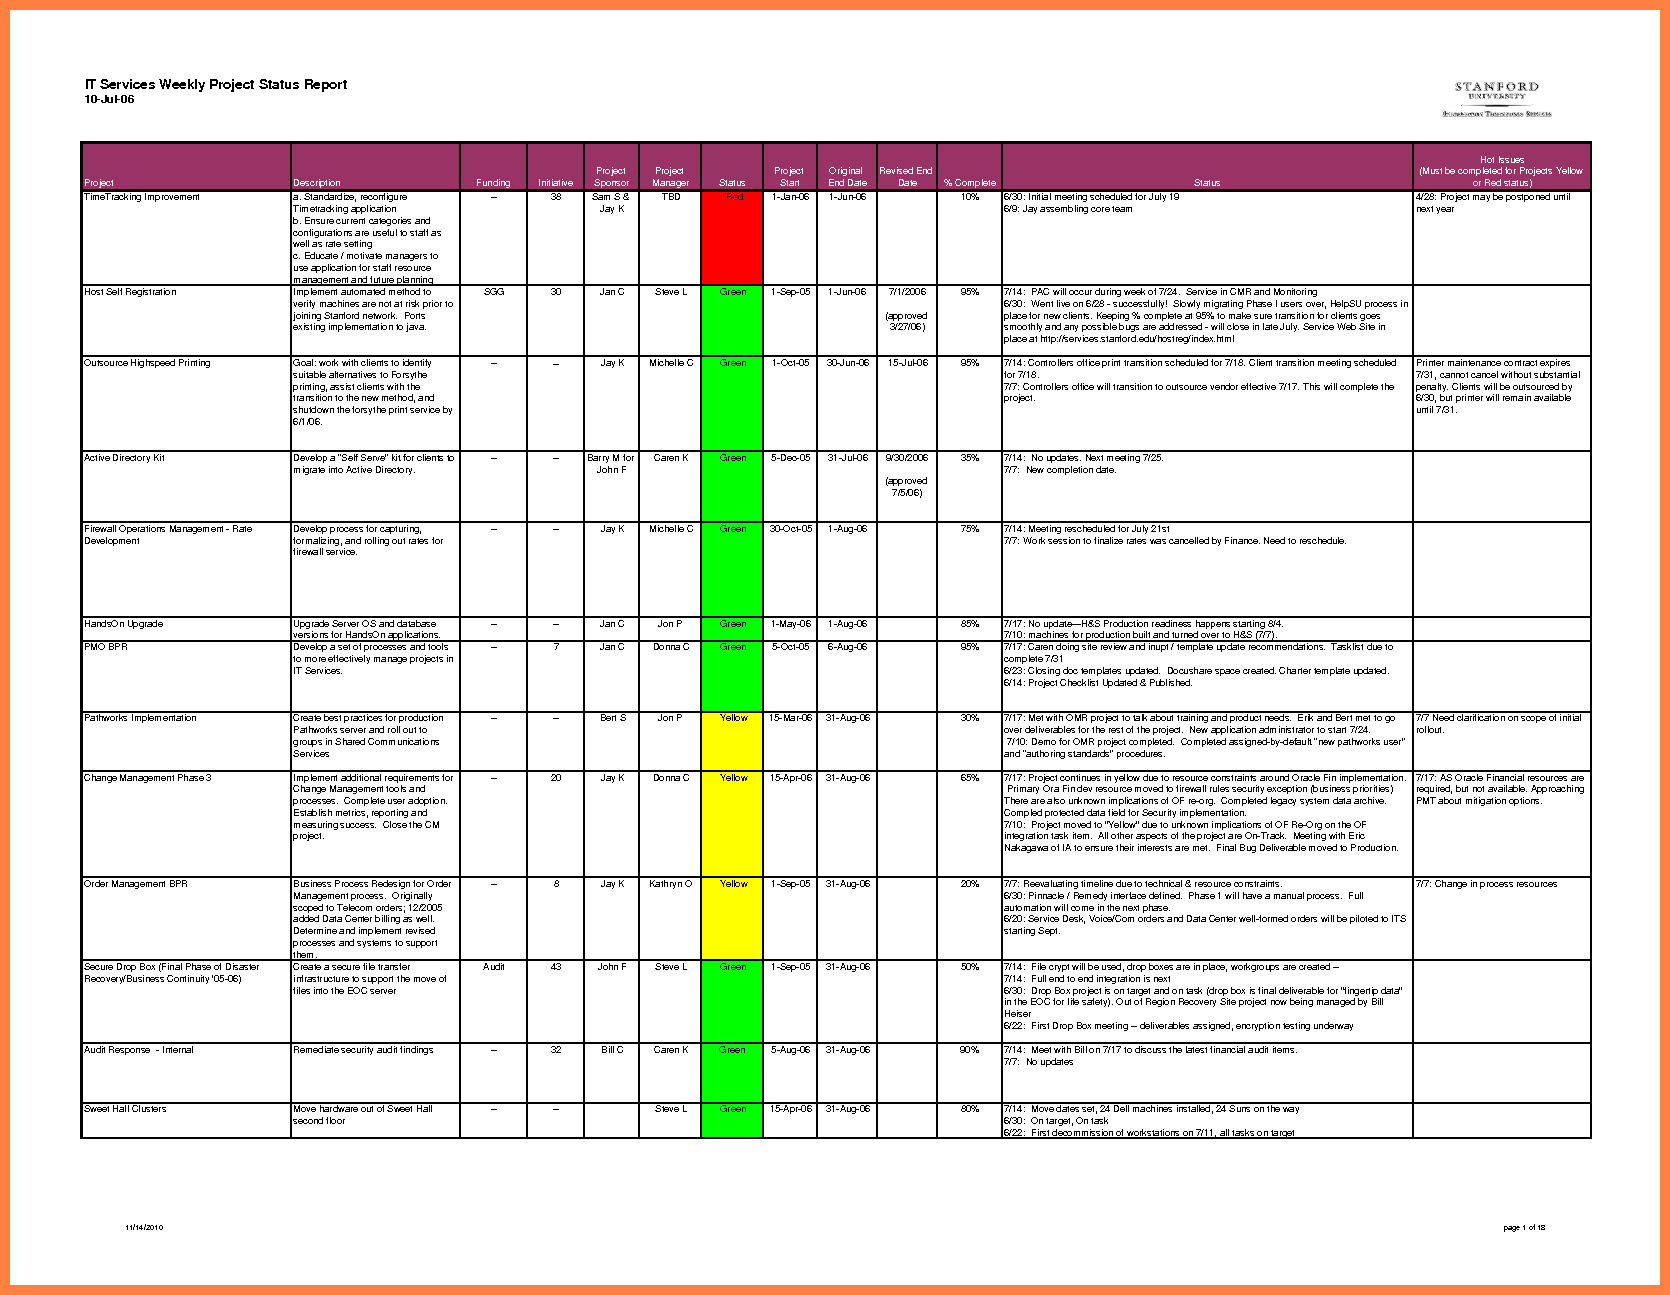 023 Excel Project Status Report Weekly Template 4Vy49Mzf Intended For Weekly Status Report Template Excel